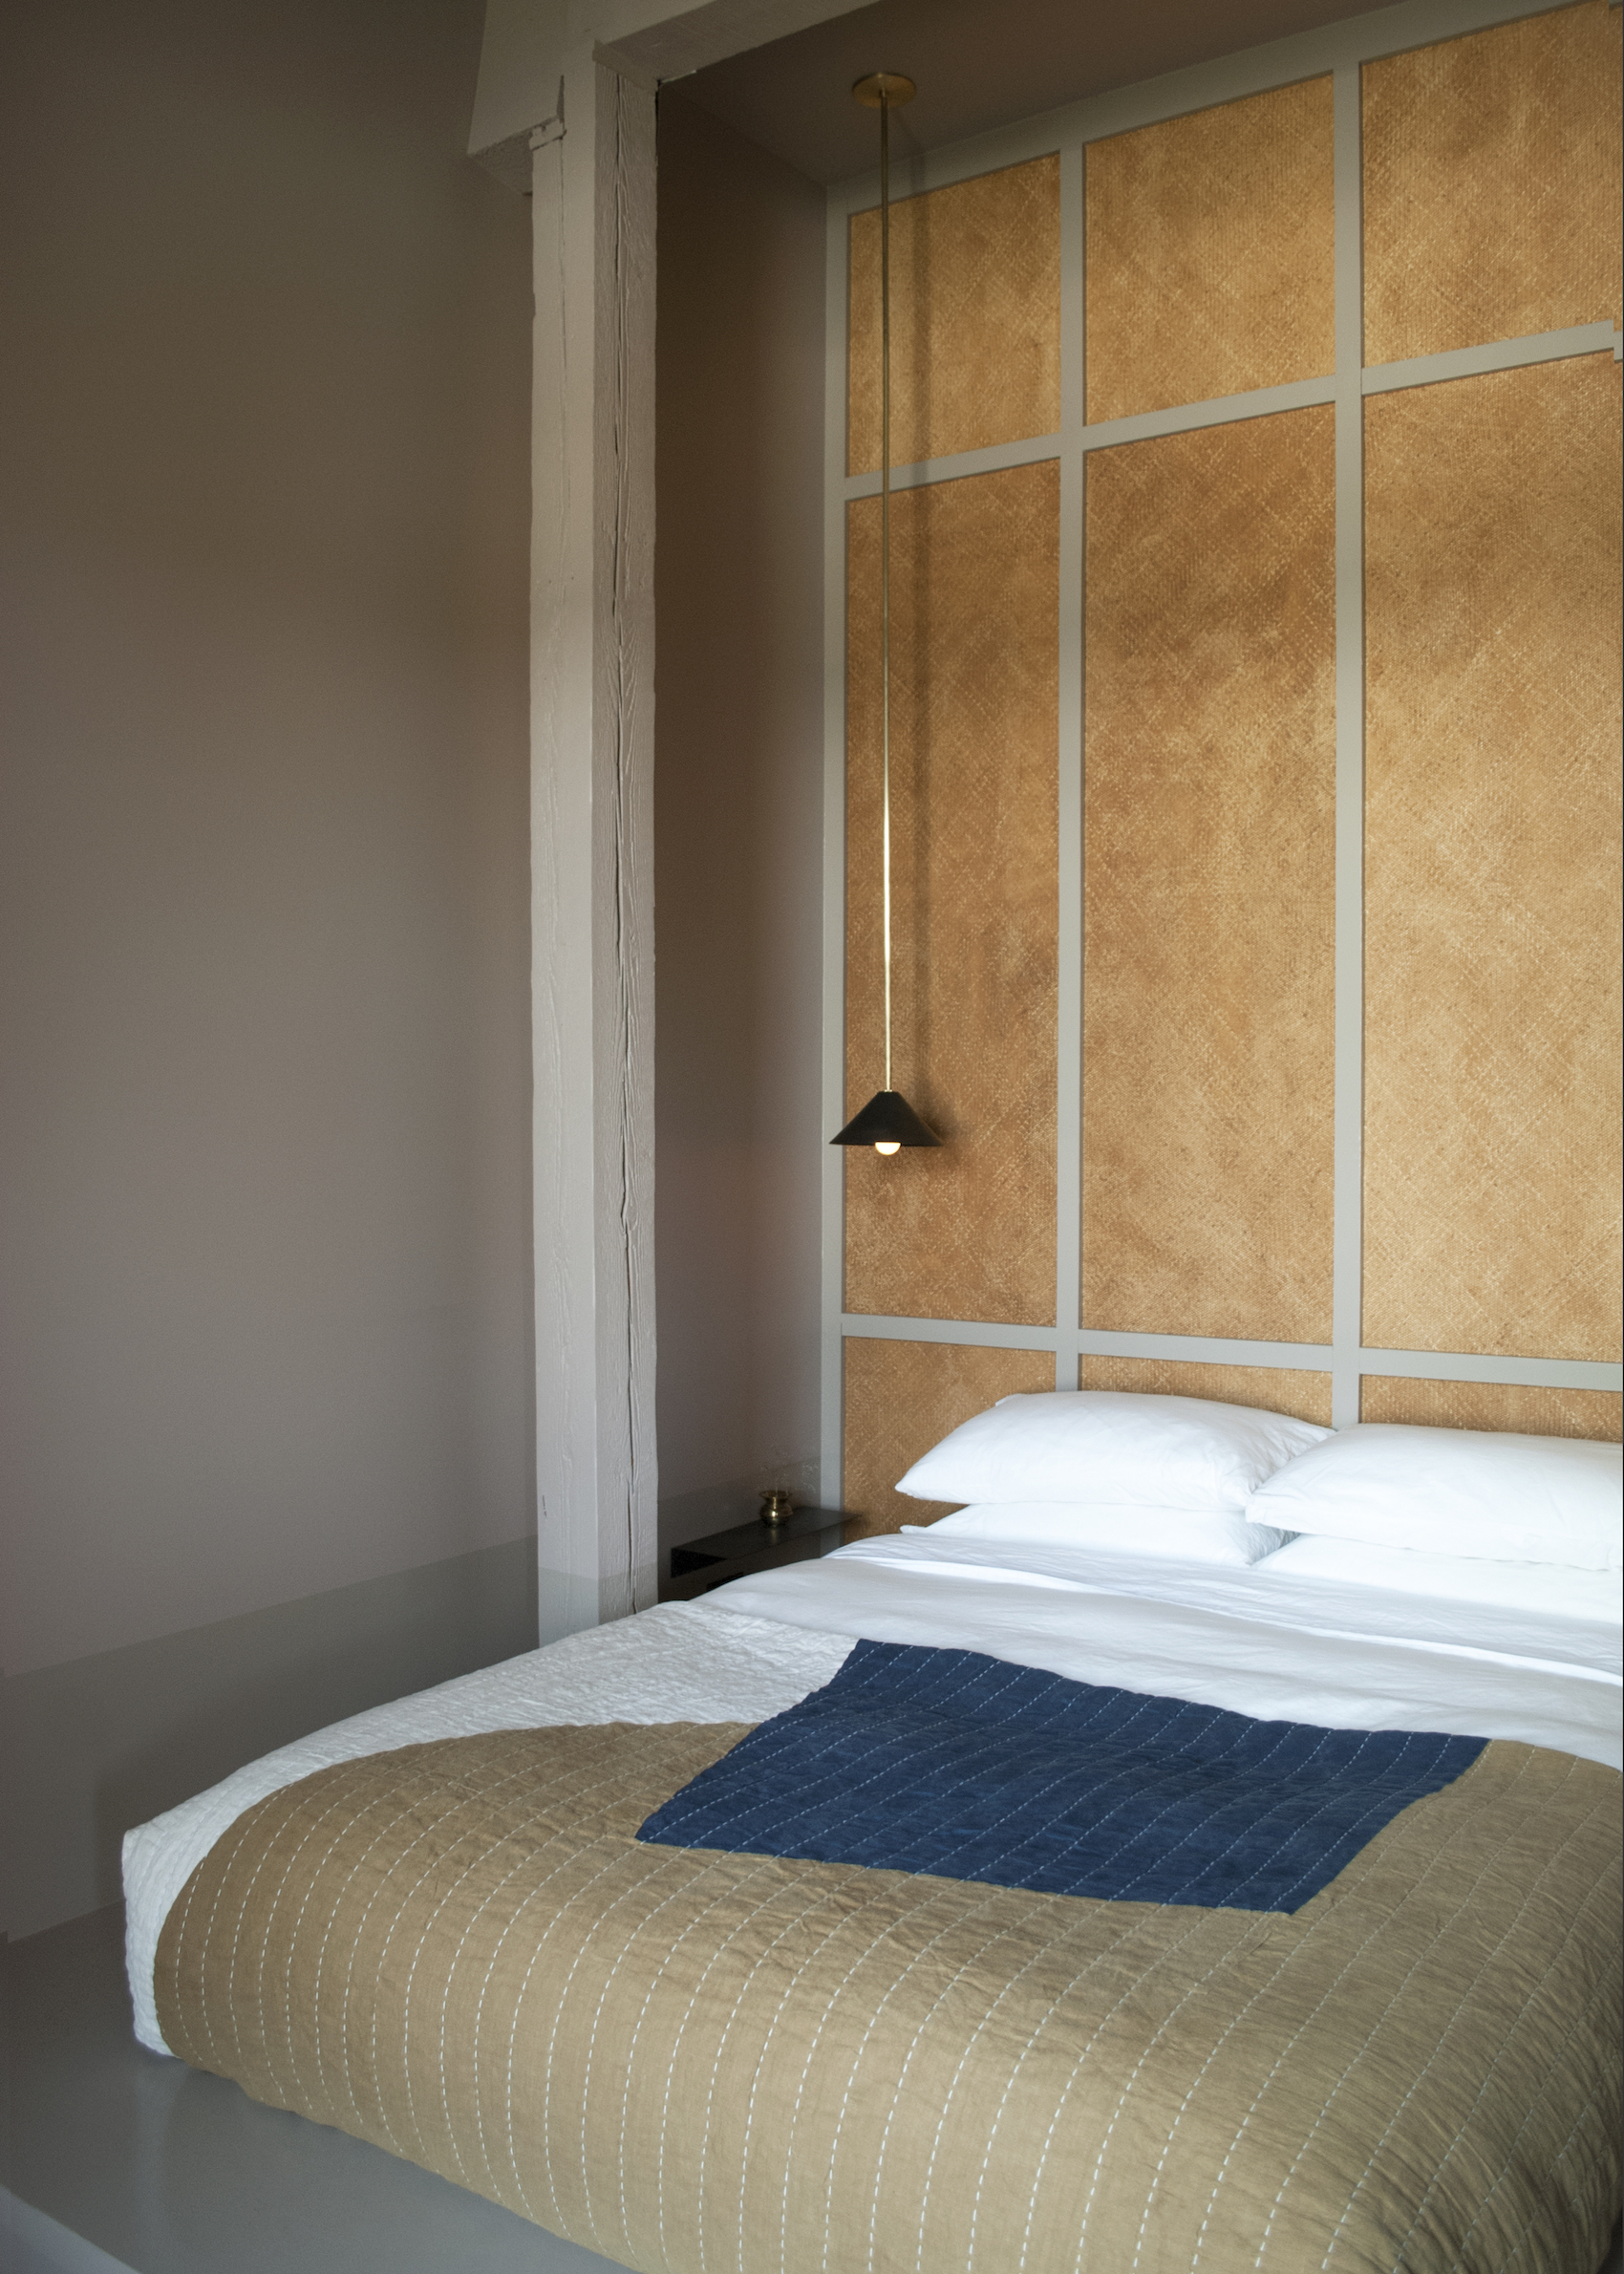 Jennings Hotel Room No. 1 by Coil + Drift